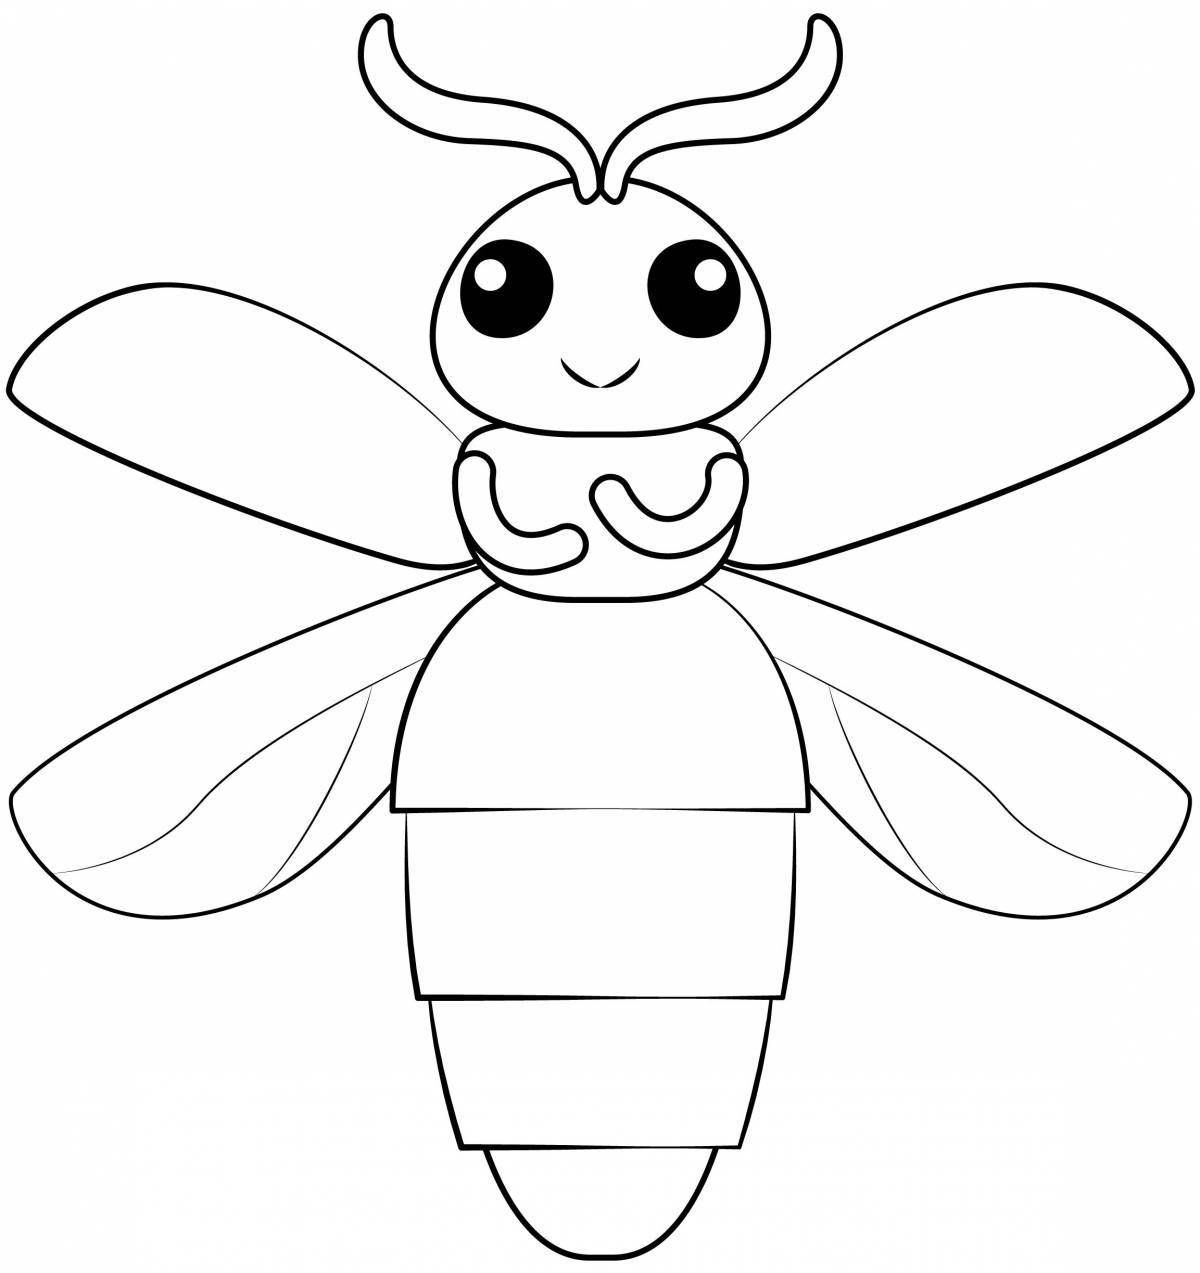 Magic fly coloring book for 3-4 year olds